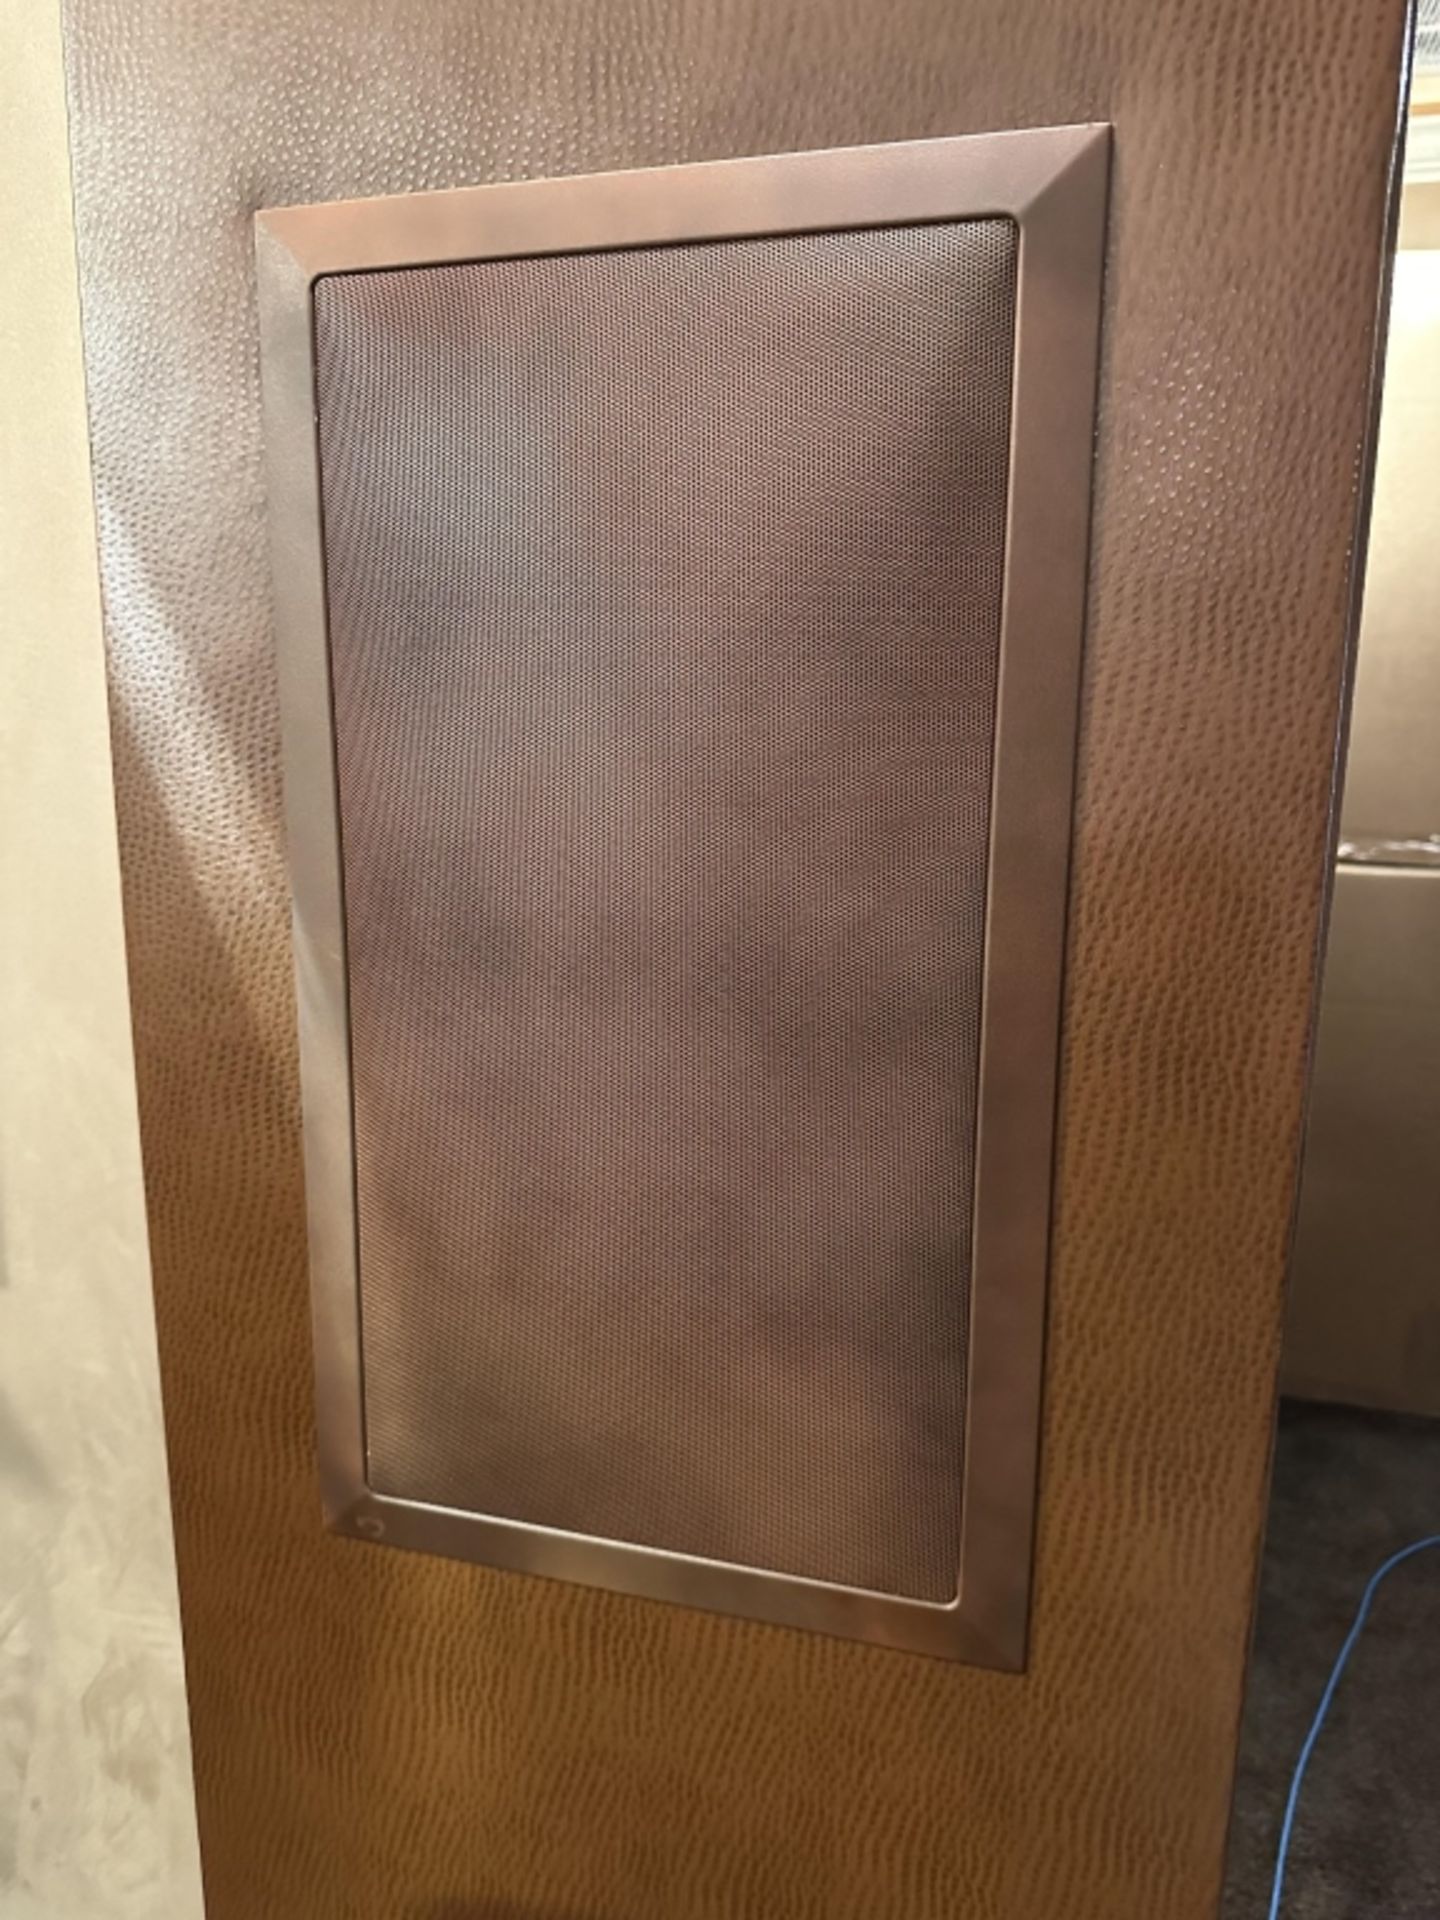 LOT CONSISTING OF (6) KLIPSCH THX WALL MOUNTED SPEAKERS (PAINTED BROWN) - Image 4 of 4